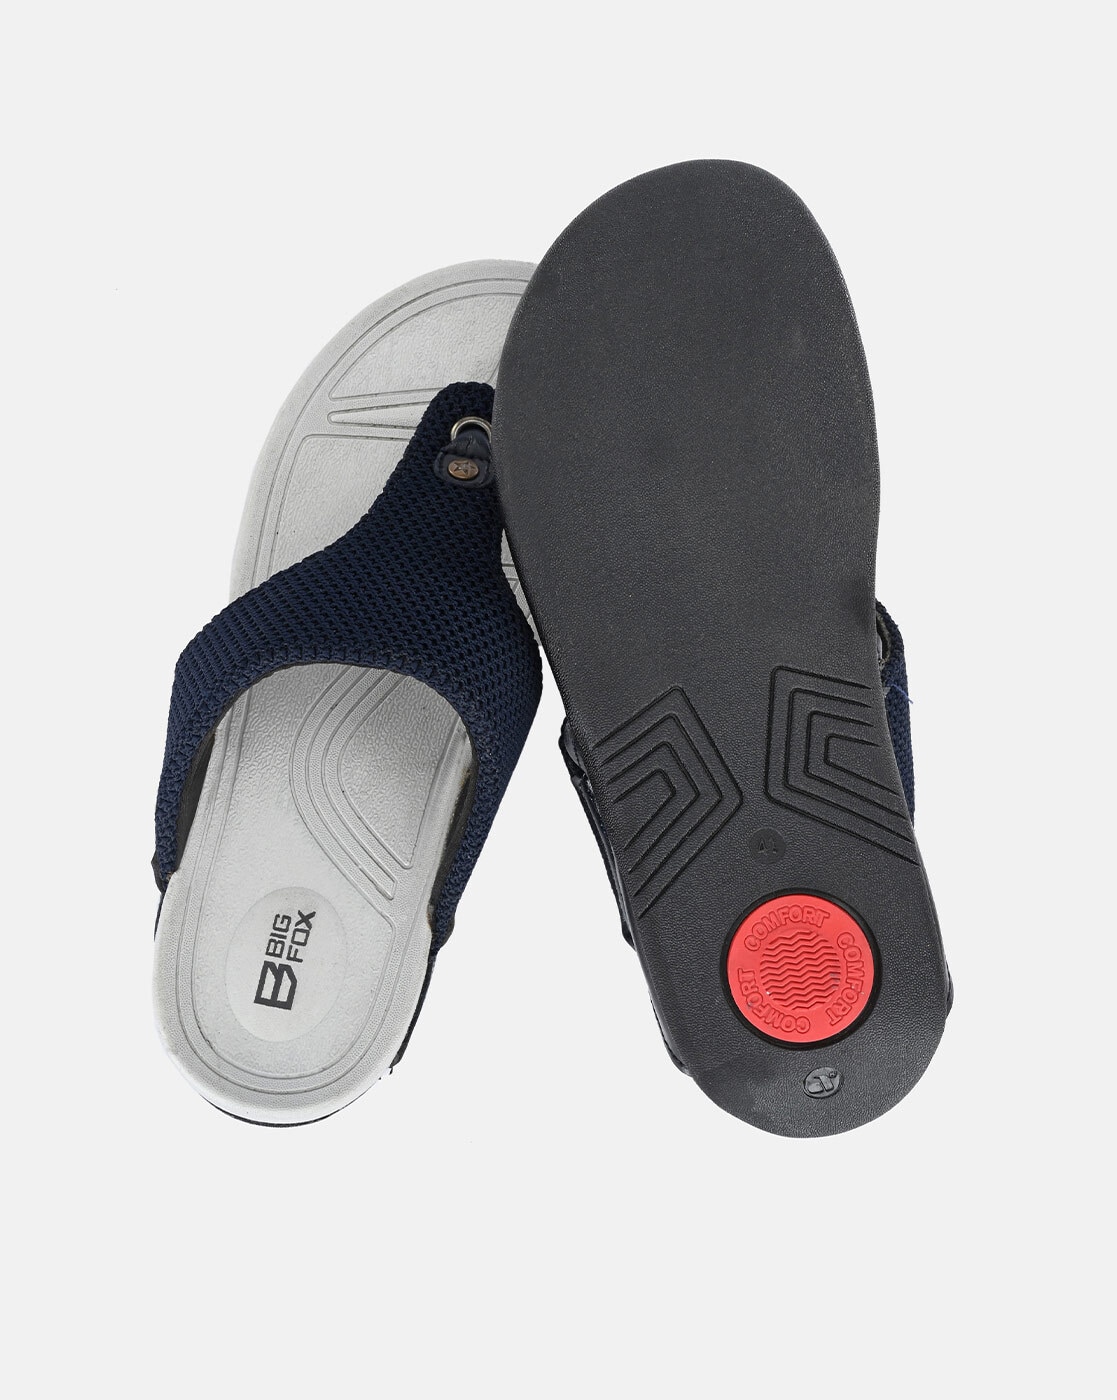 Mens Sandals - Buy Men's Slippers in India at Best Prices – Hitz Shoes  Online